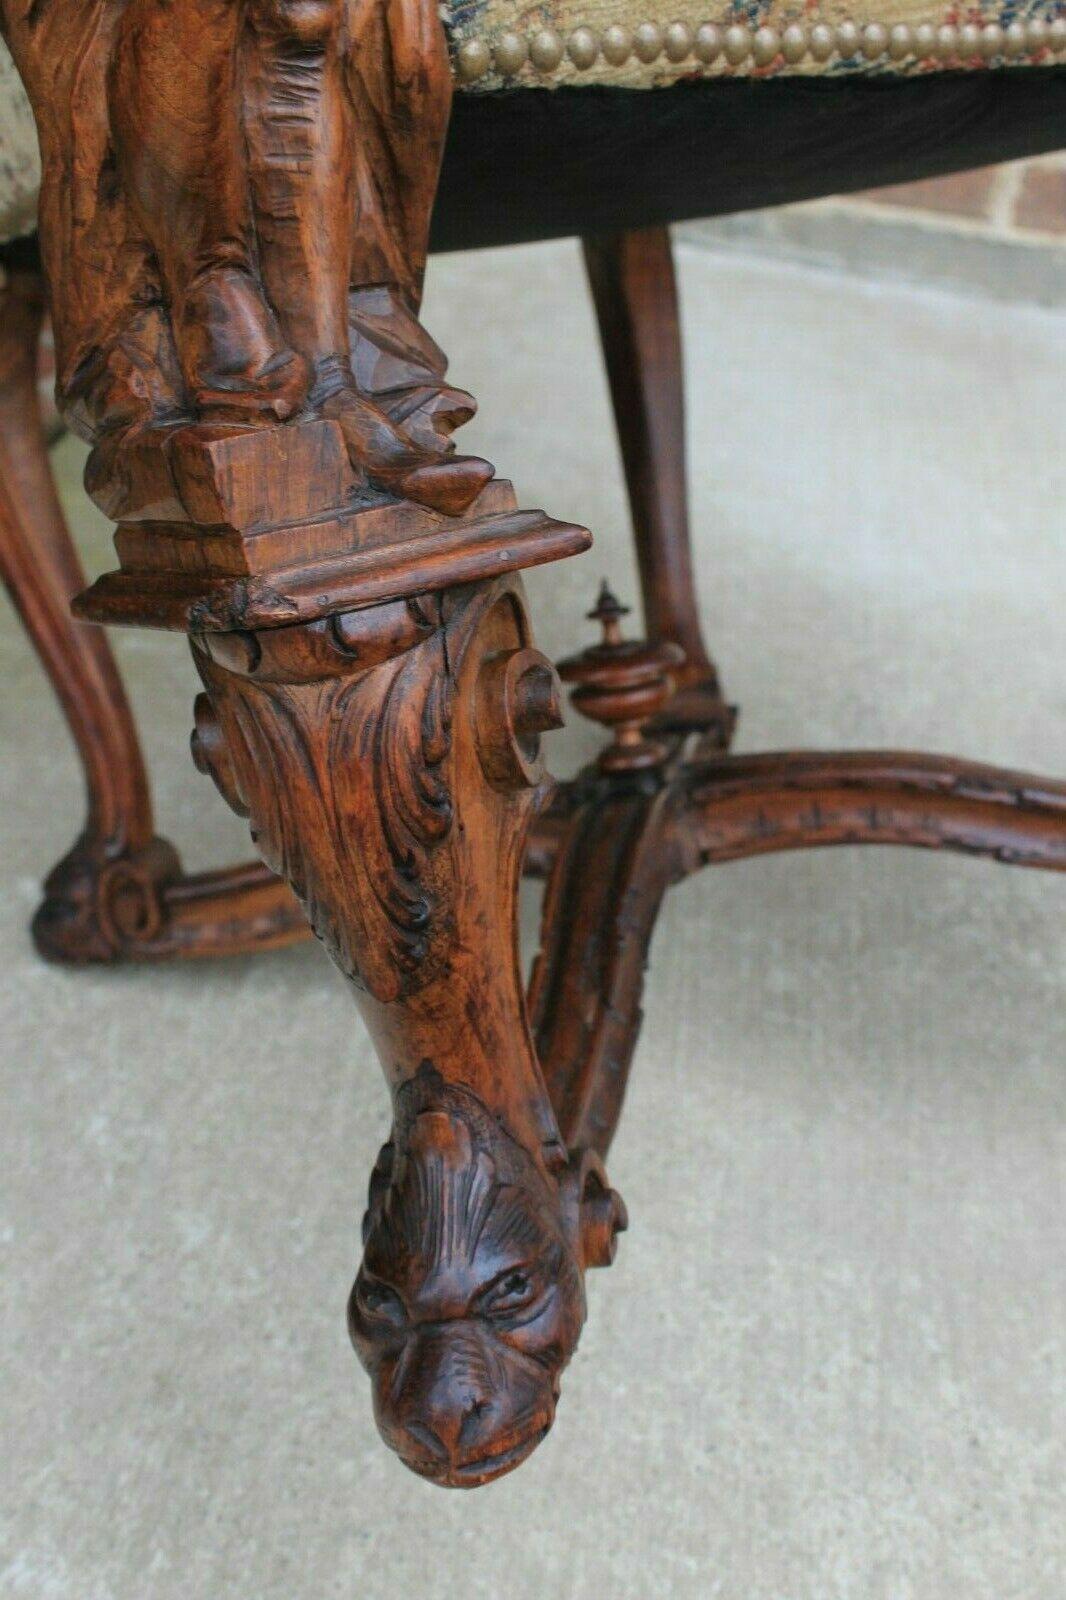 Antique Italian Besarel Walnut Arm Chair Baroque Upholstered Mid-19th C Rare For Sale 4